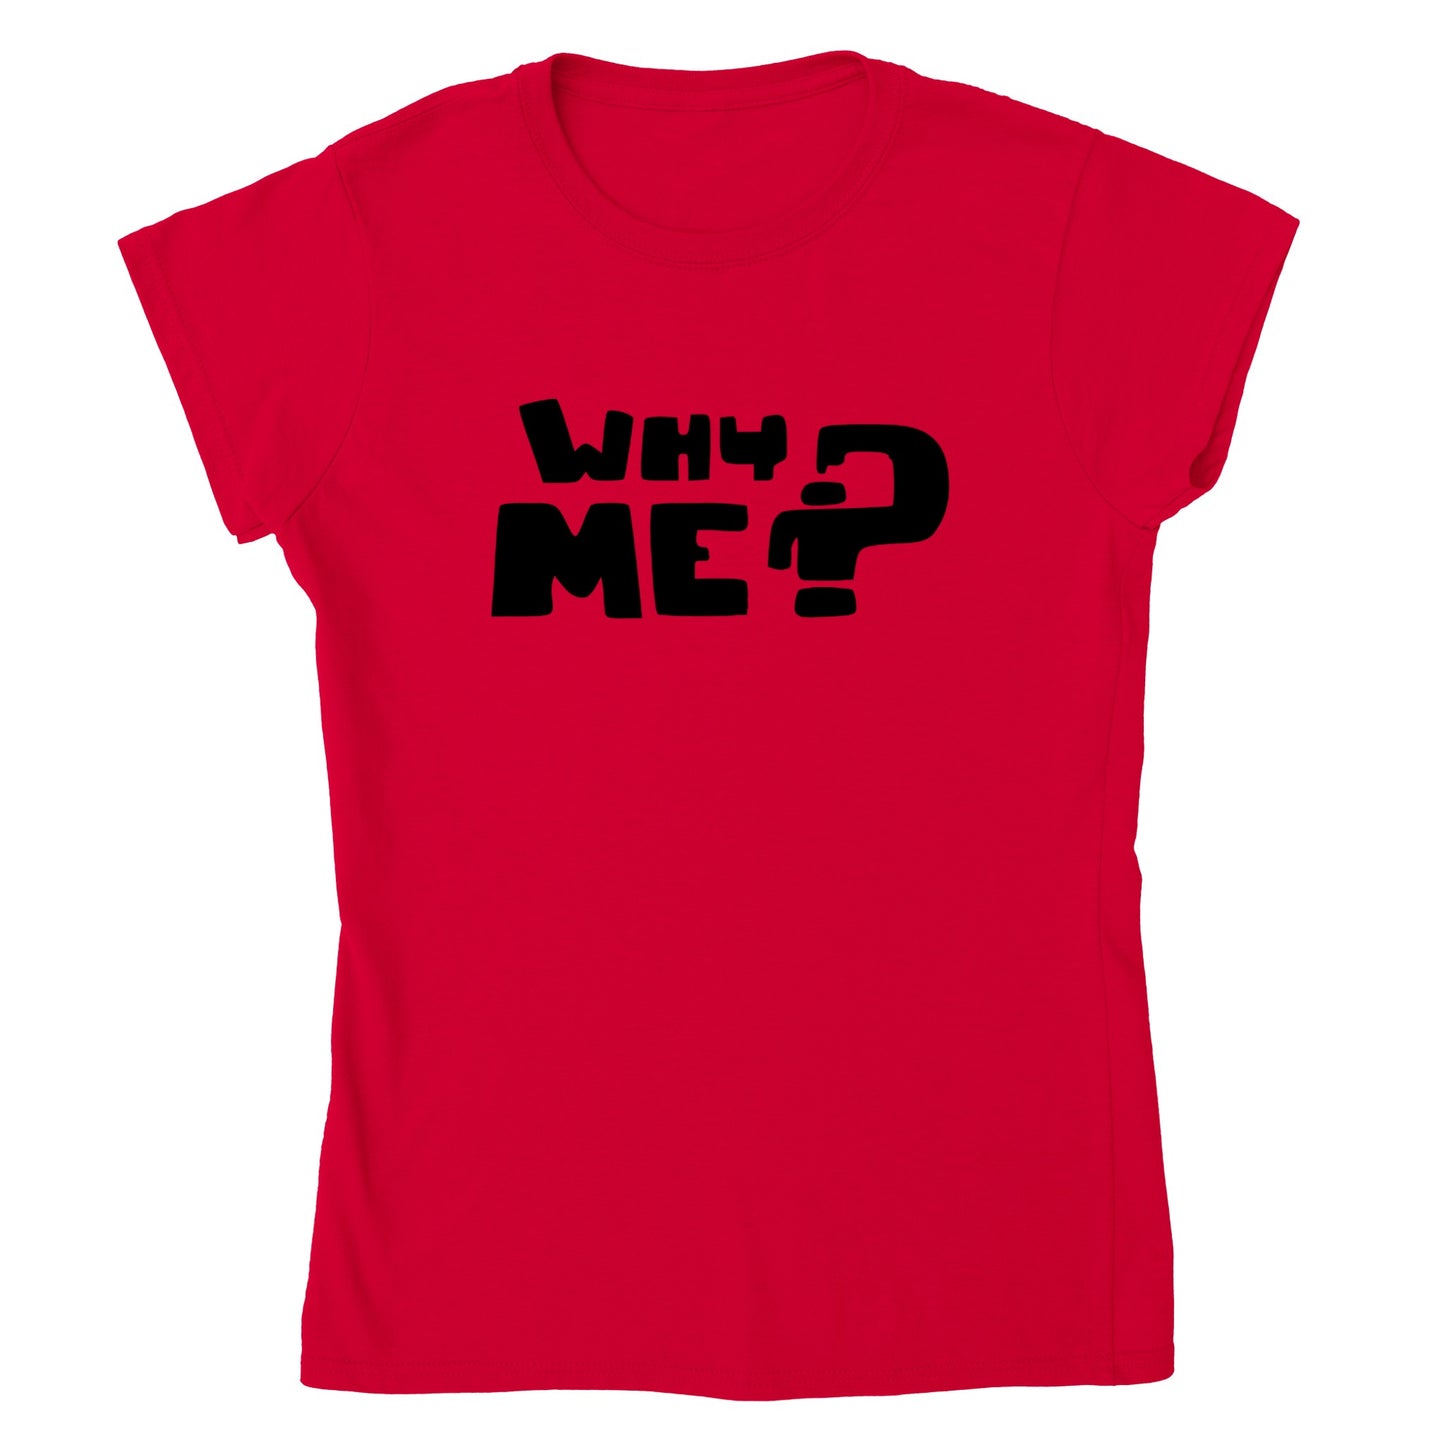 Why Me? Ladies T-shirt - Mister Snarky's